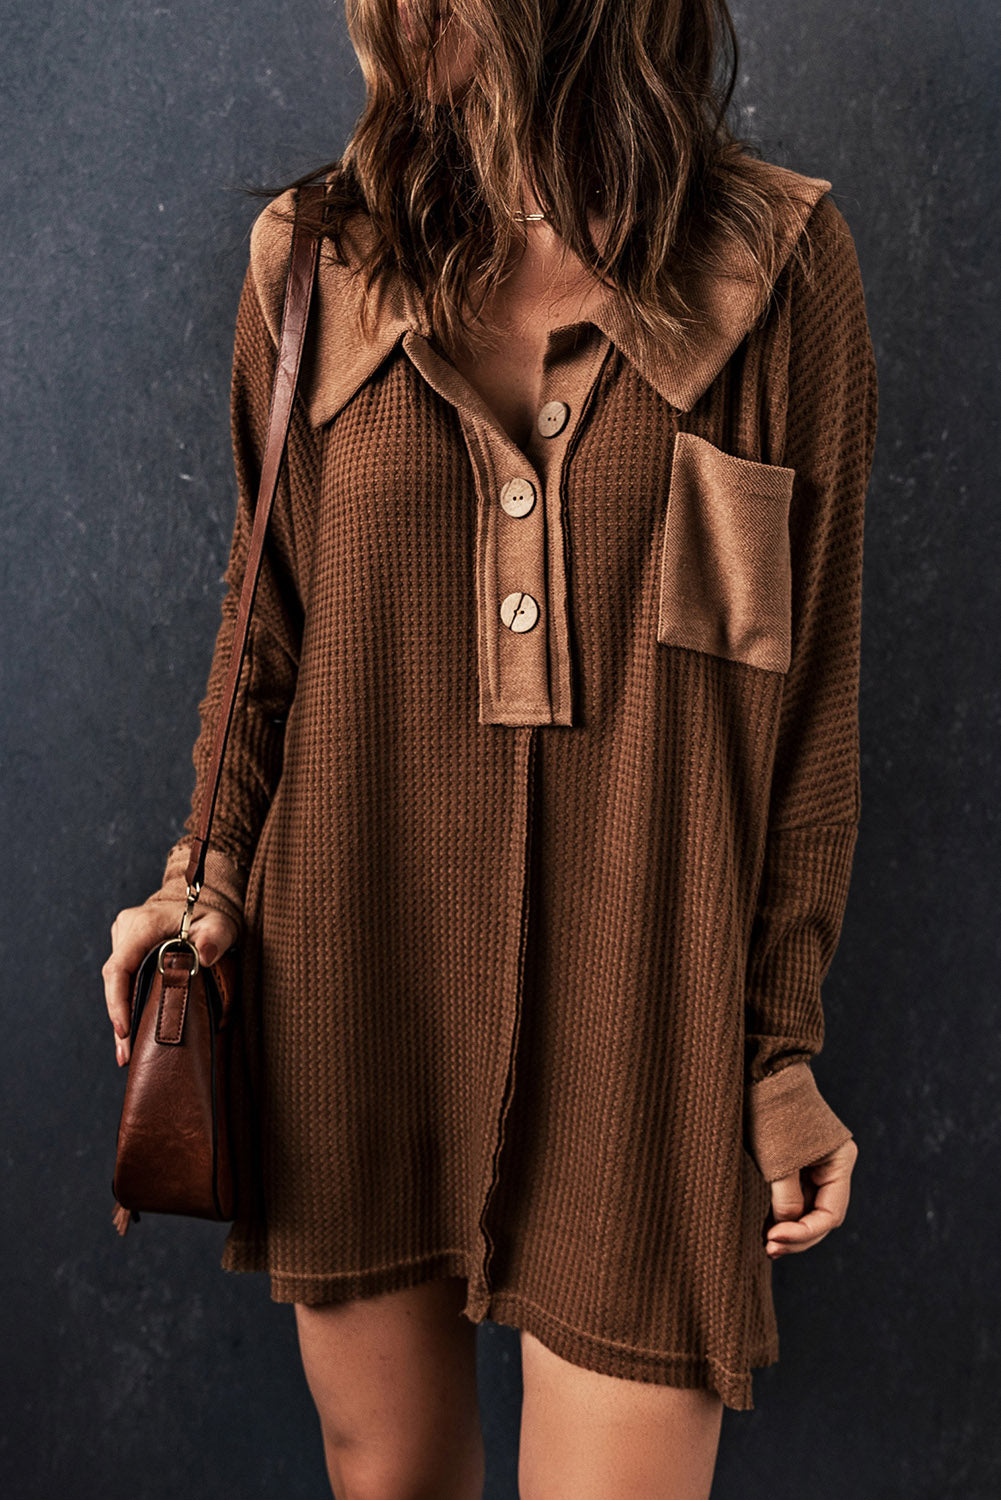 Brown Mineral Dyed Vintage Waffle Smock Top Women Loose All Match T shirt